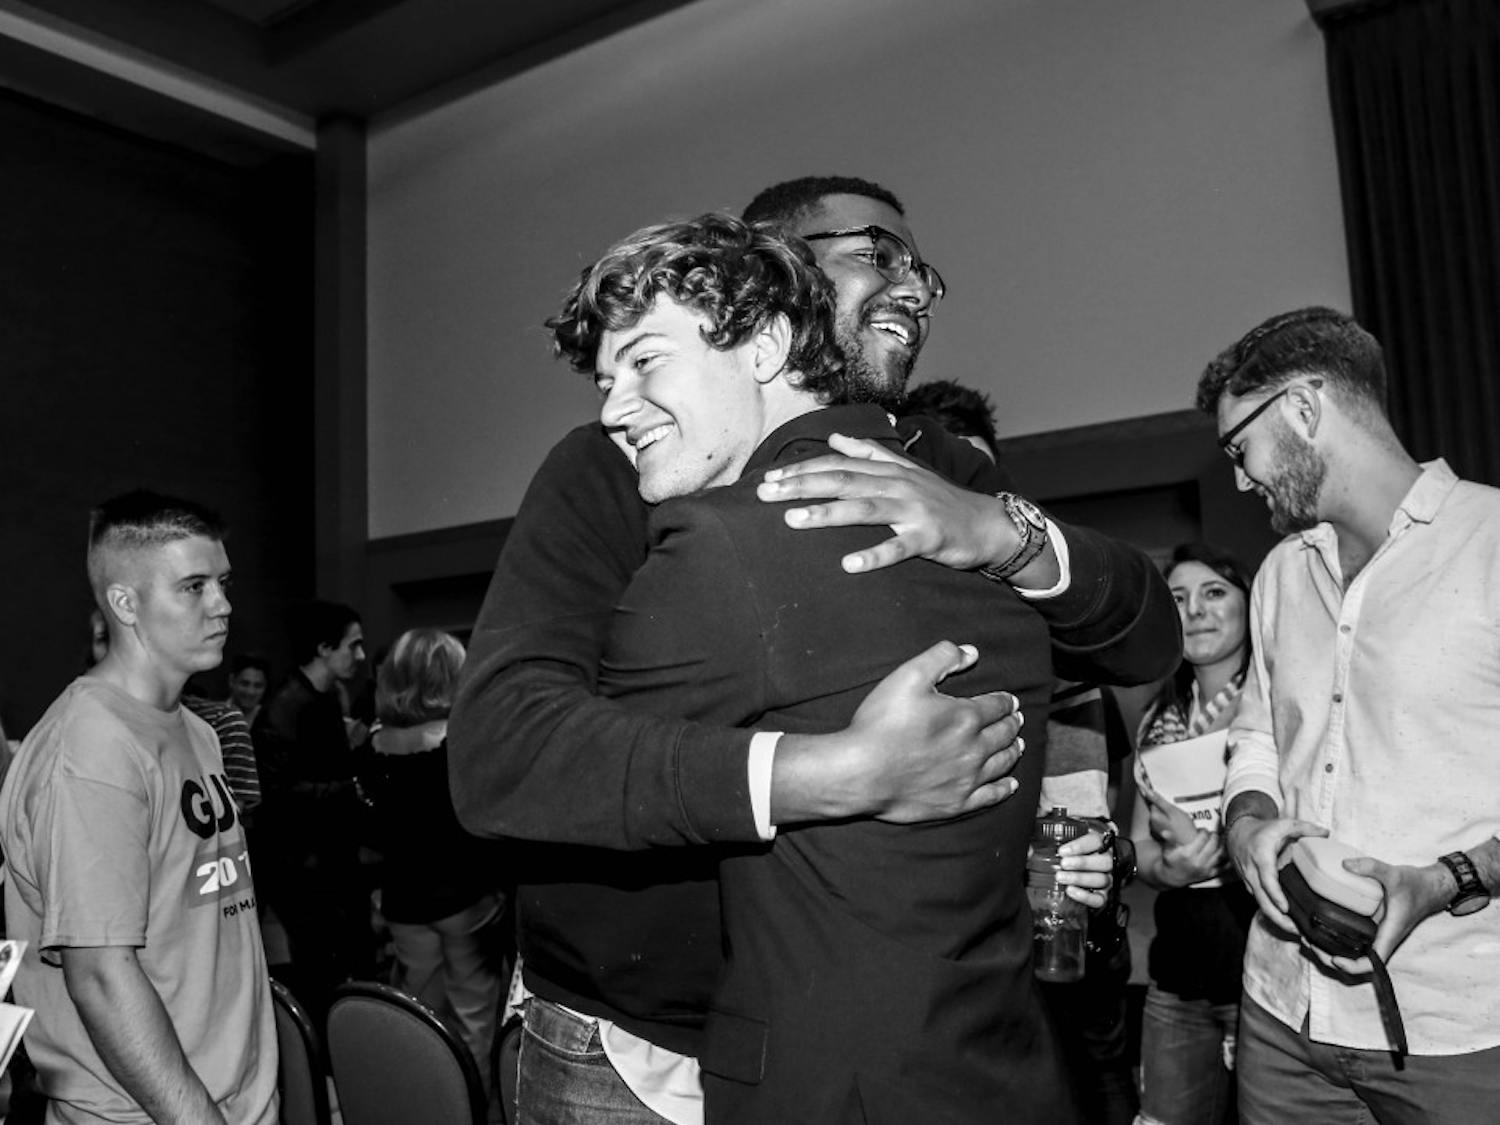 Joshua Reeves, left, embraces mayoral candidate Augustus ?Gus? Pedrotty on Saturday, Sept. 28, 2017 after the mayoral debate forum at the SUB ballroom. 